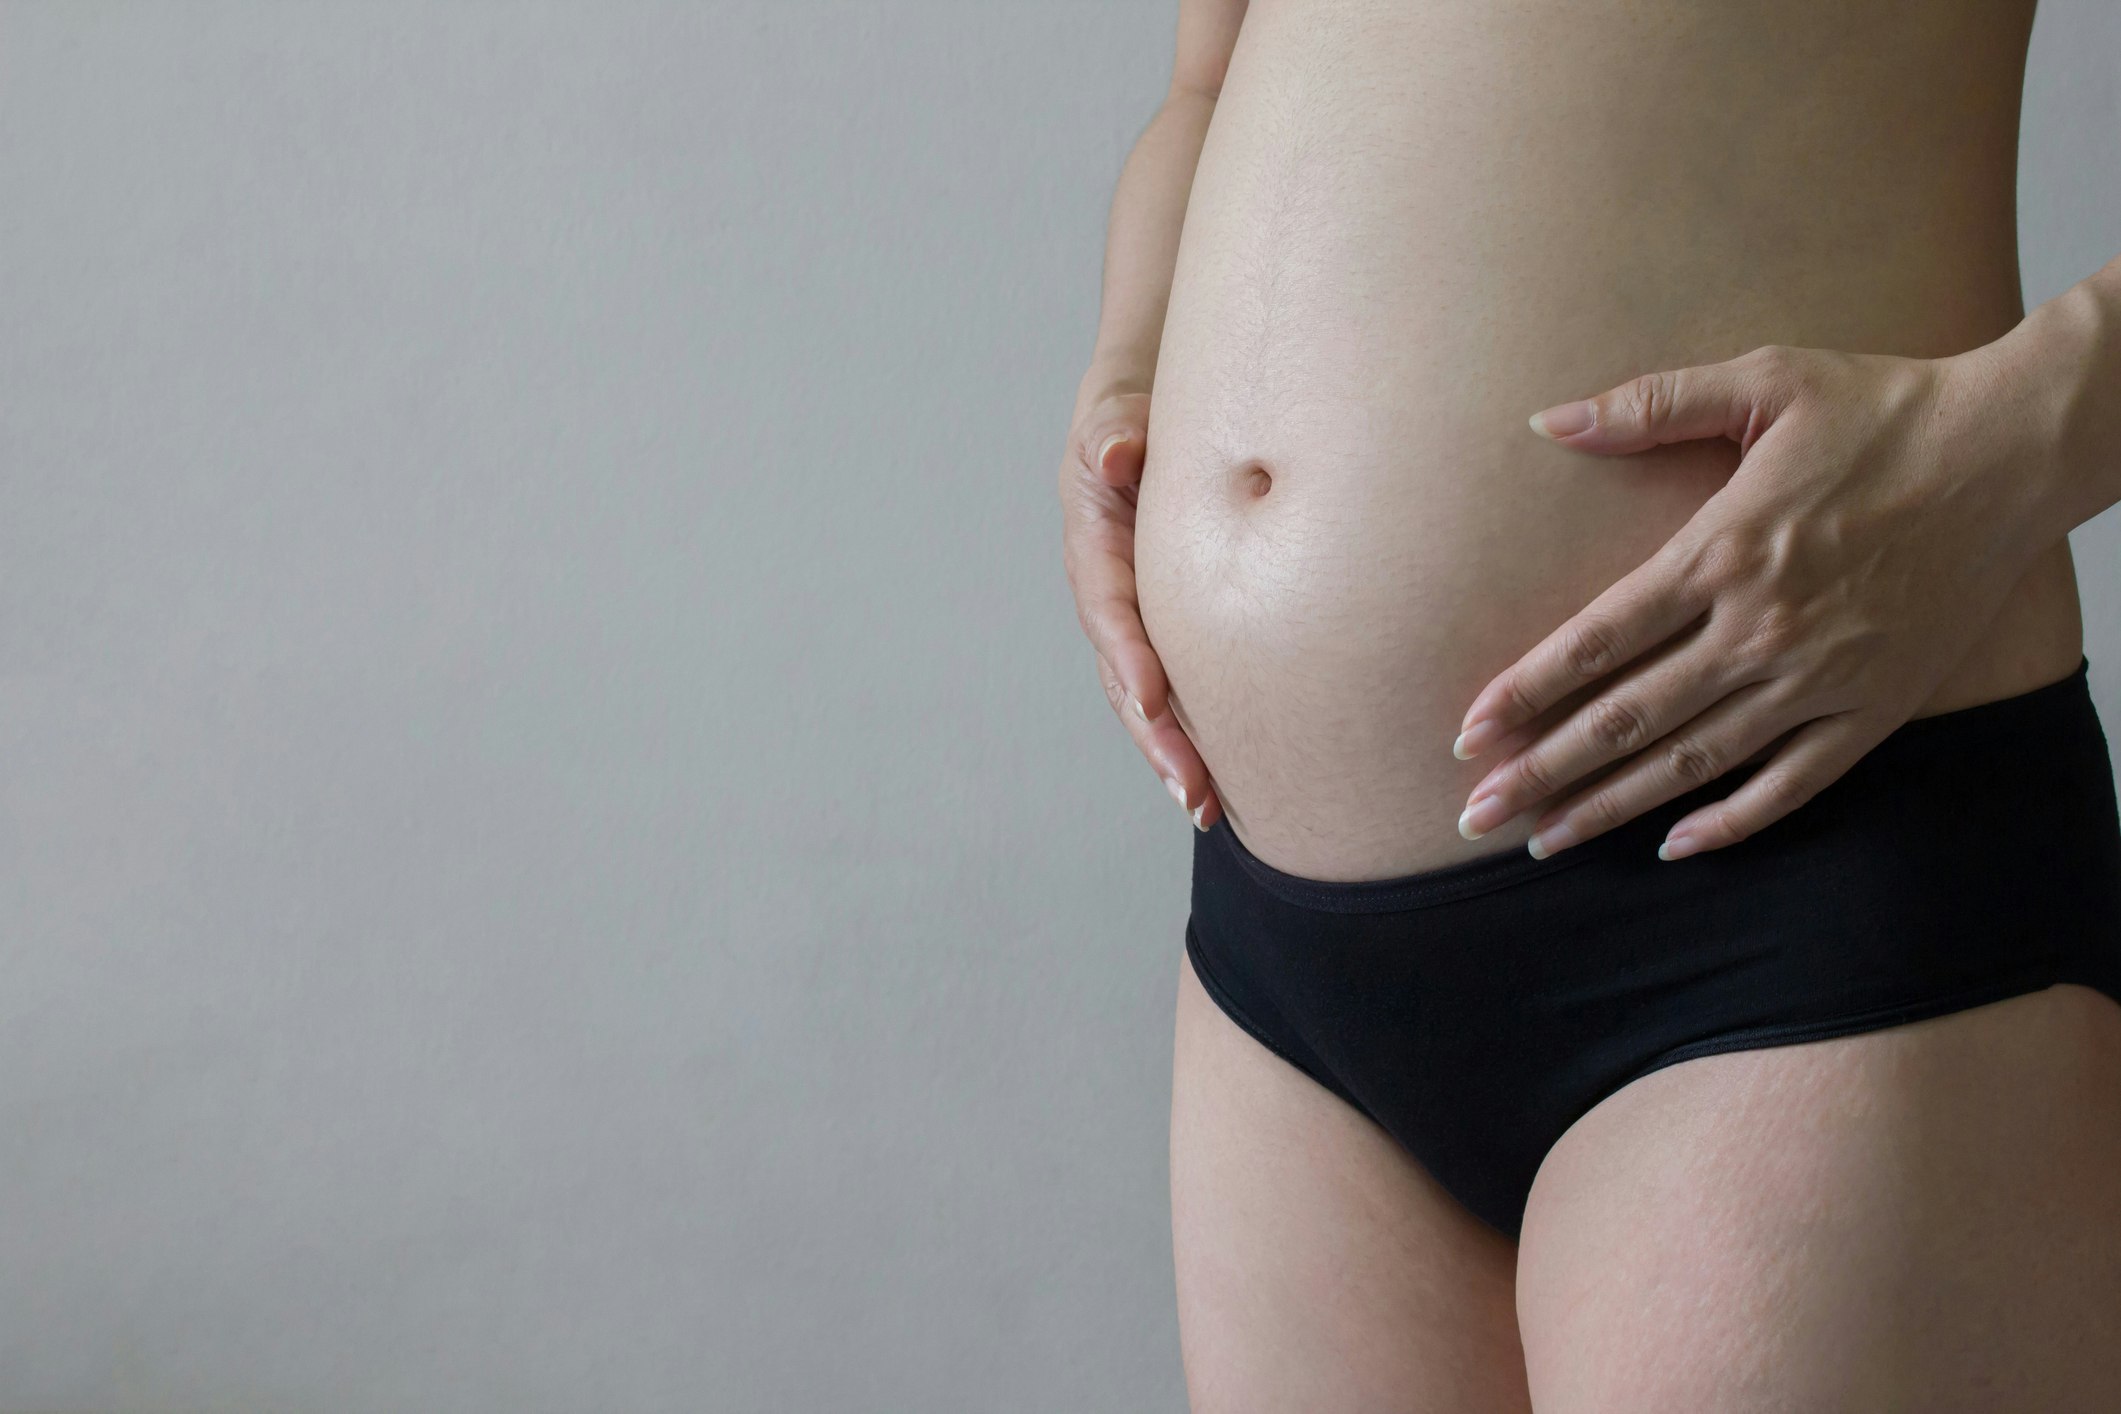 4 months pregnant: Belly, symptoms and baby development